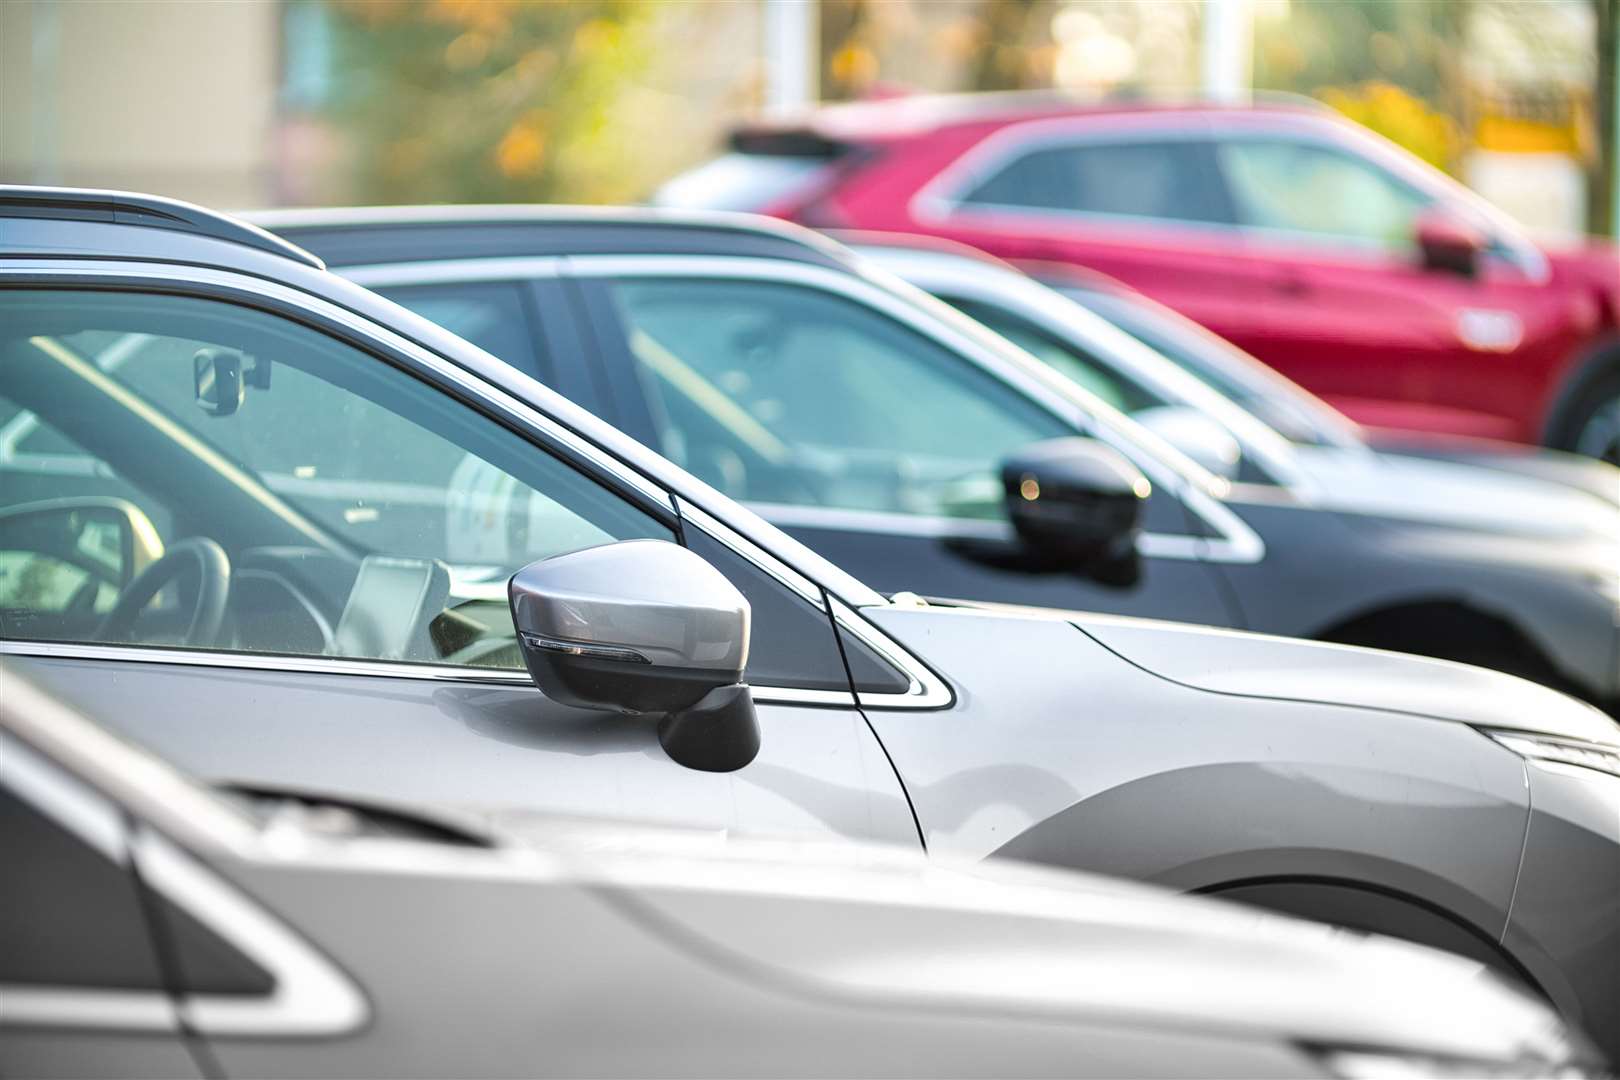 If the investigation finds loans were mis-sold millions of drivers could be in line for compensation. Image: iStock.